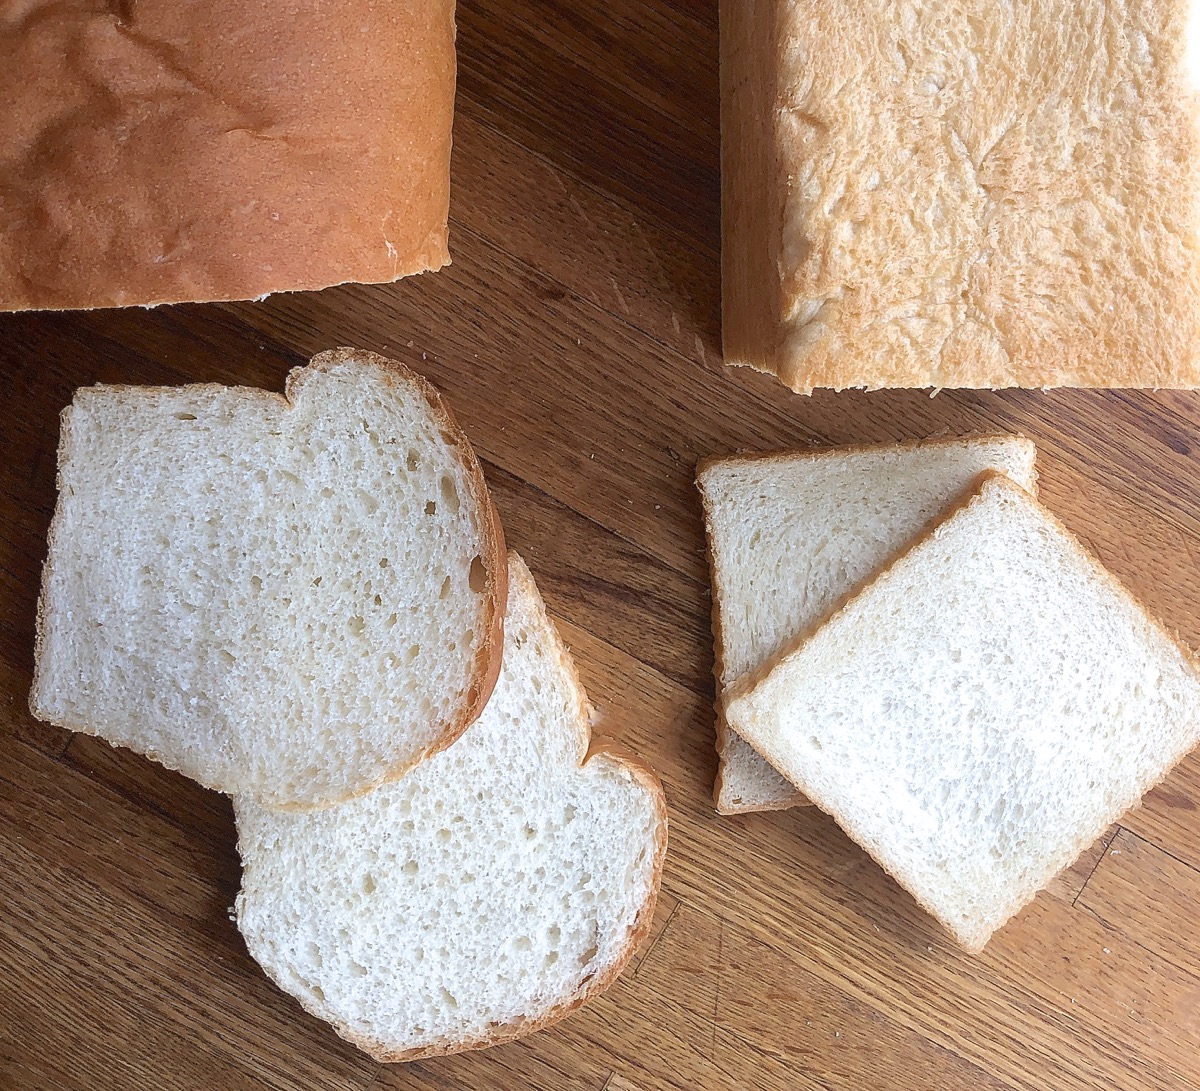 Comparison of slices of bread from two pans: standard loaf pan and pain de mie pan